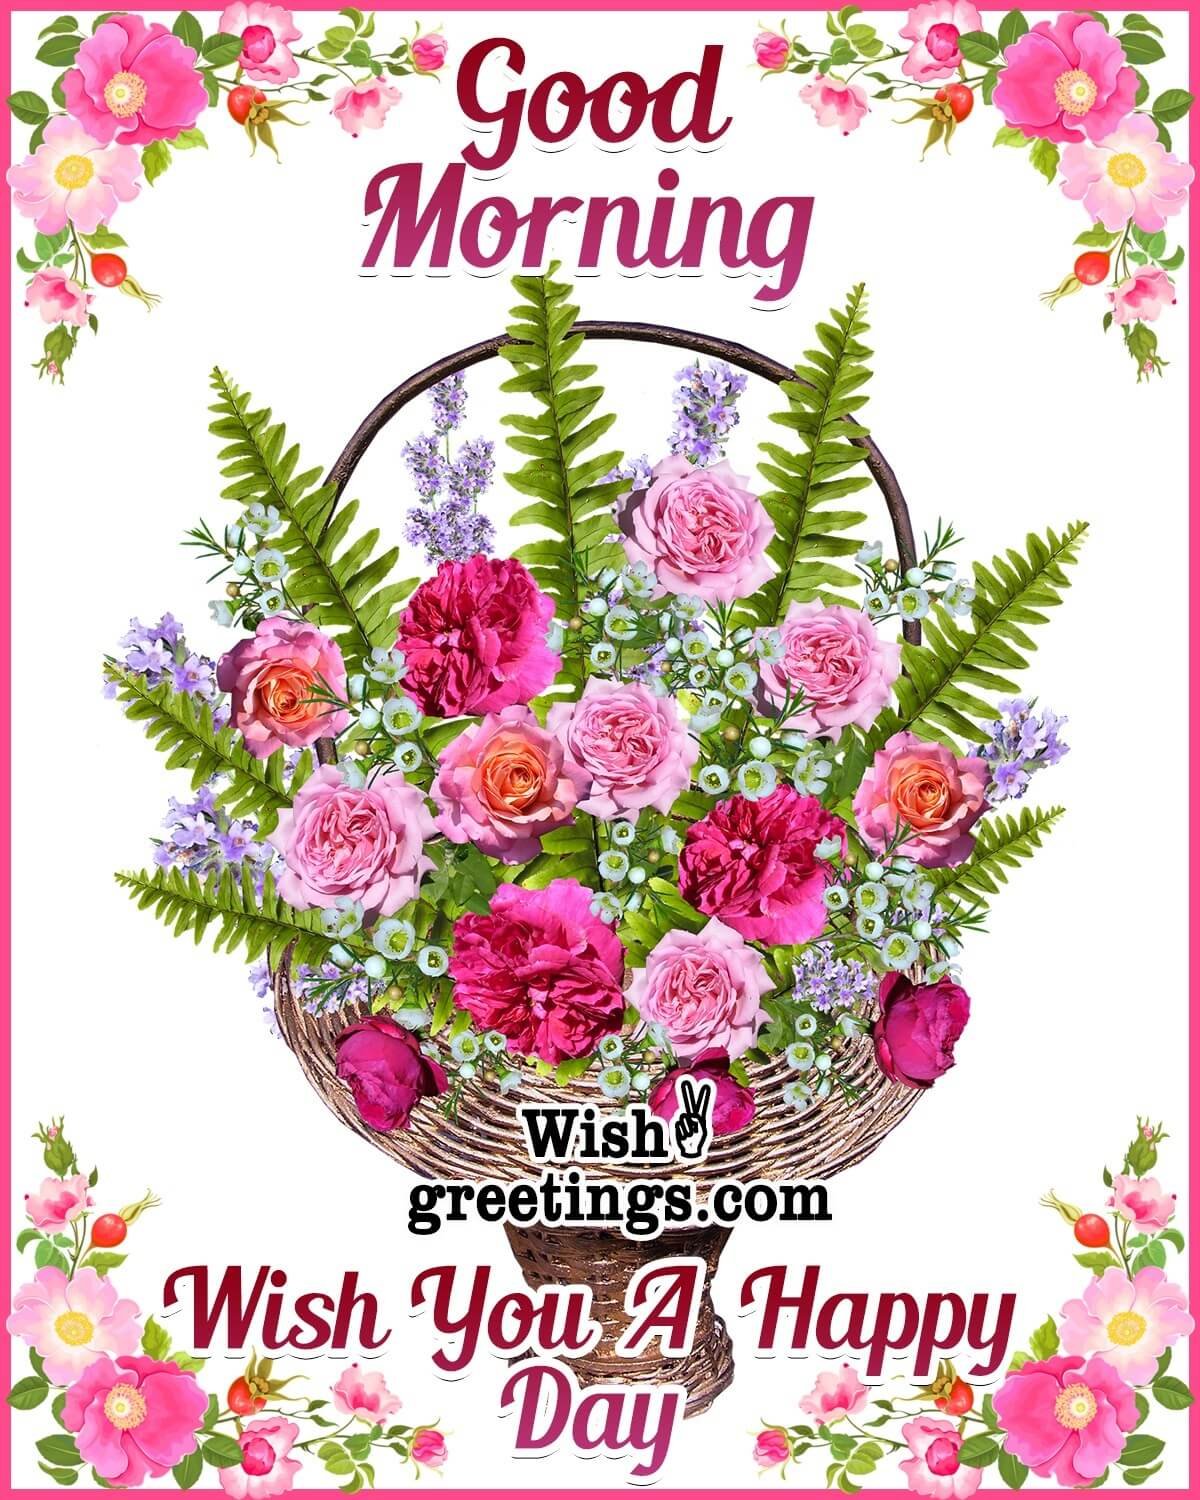 Good Morning Wish You A Happy Day